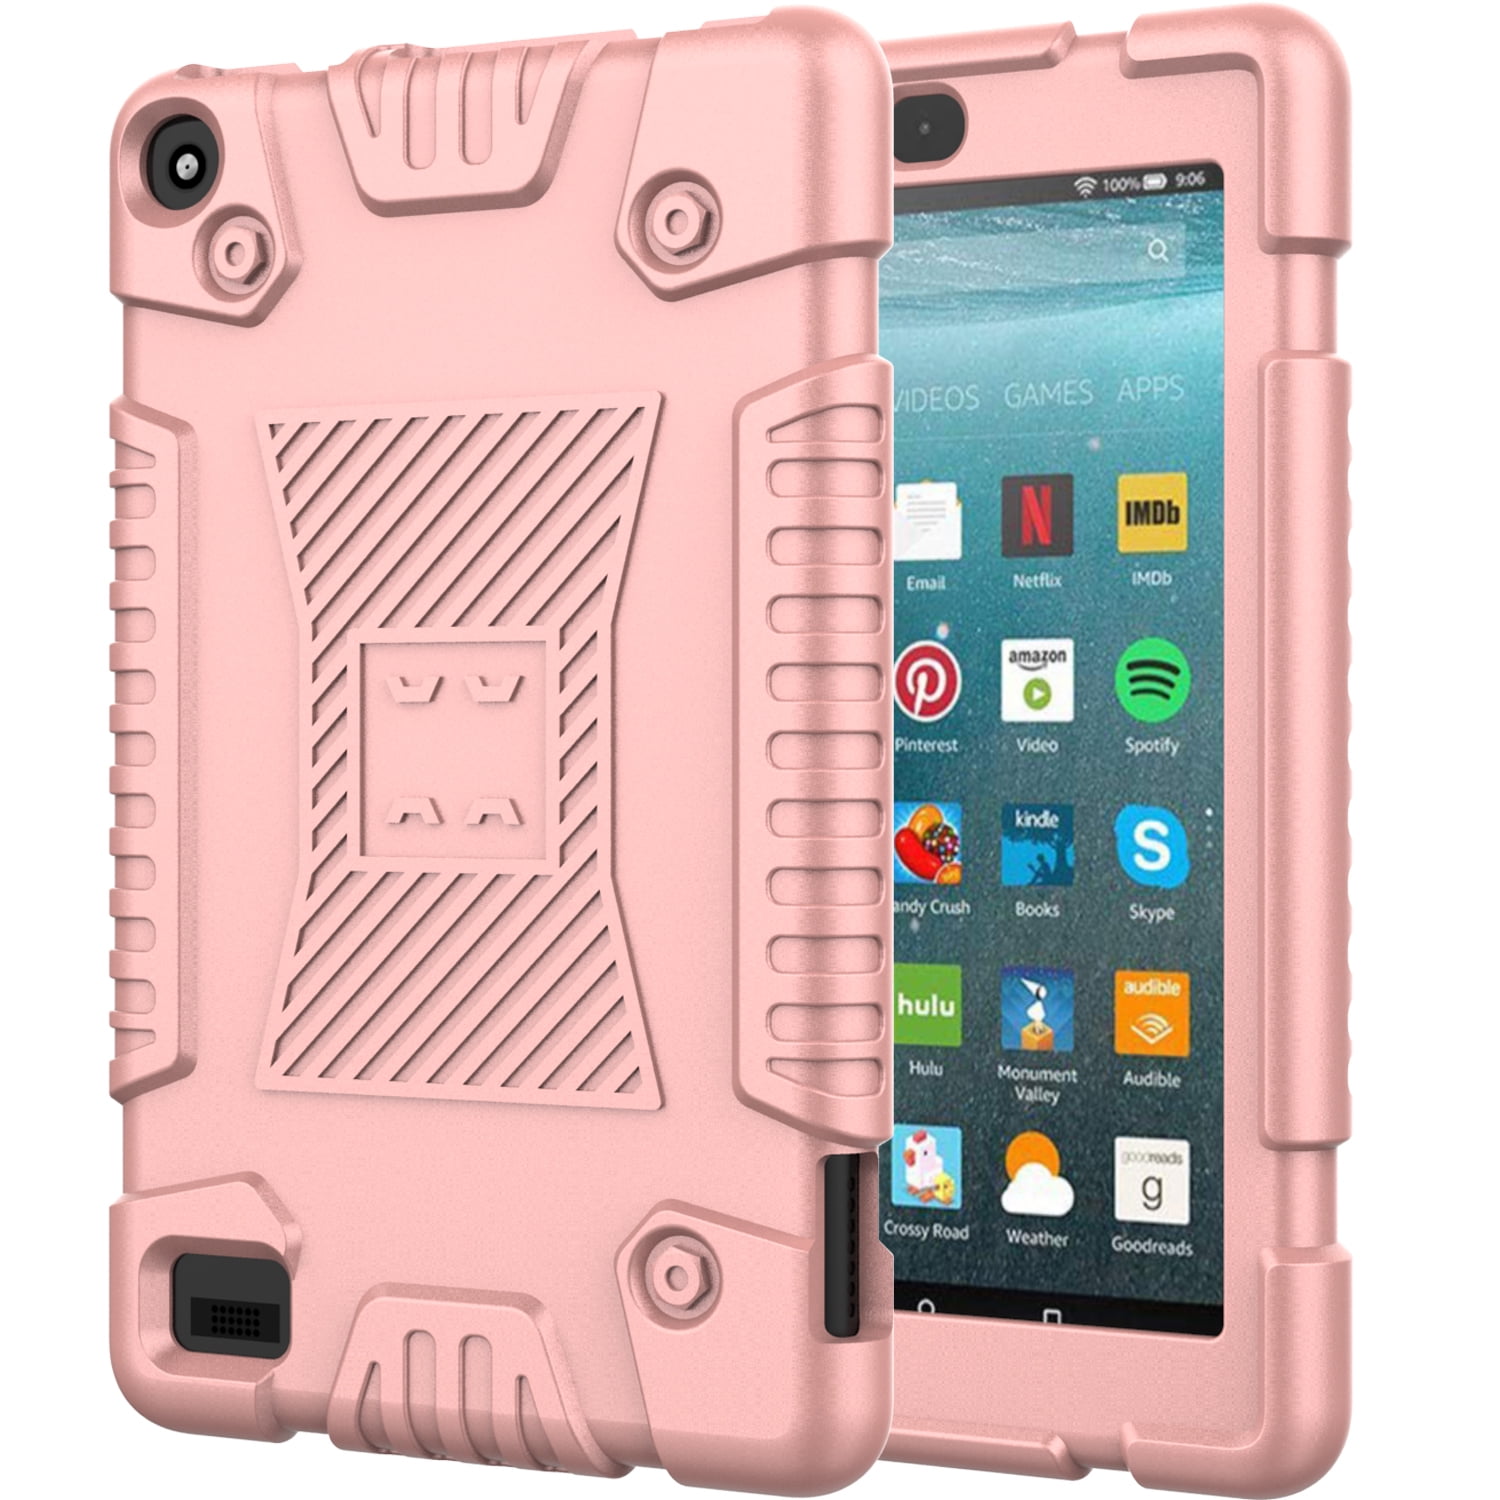 Fire 7 Case 2019, New Kindle Fire 7 9th Generation Cases